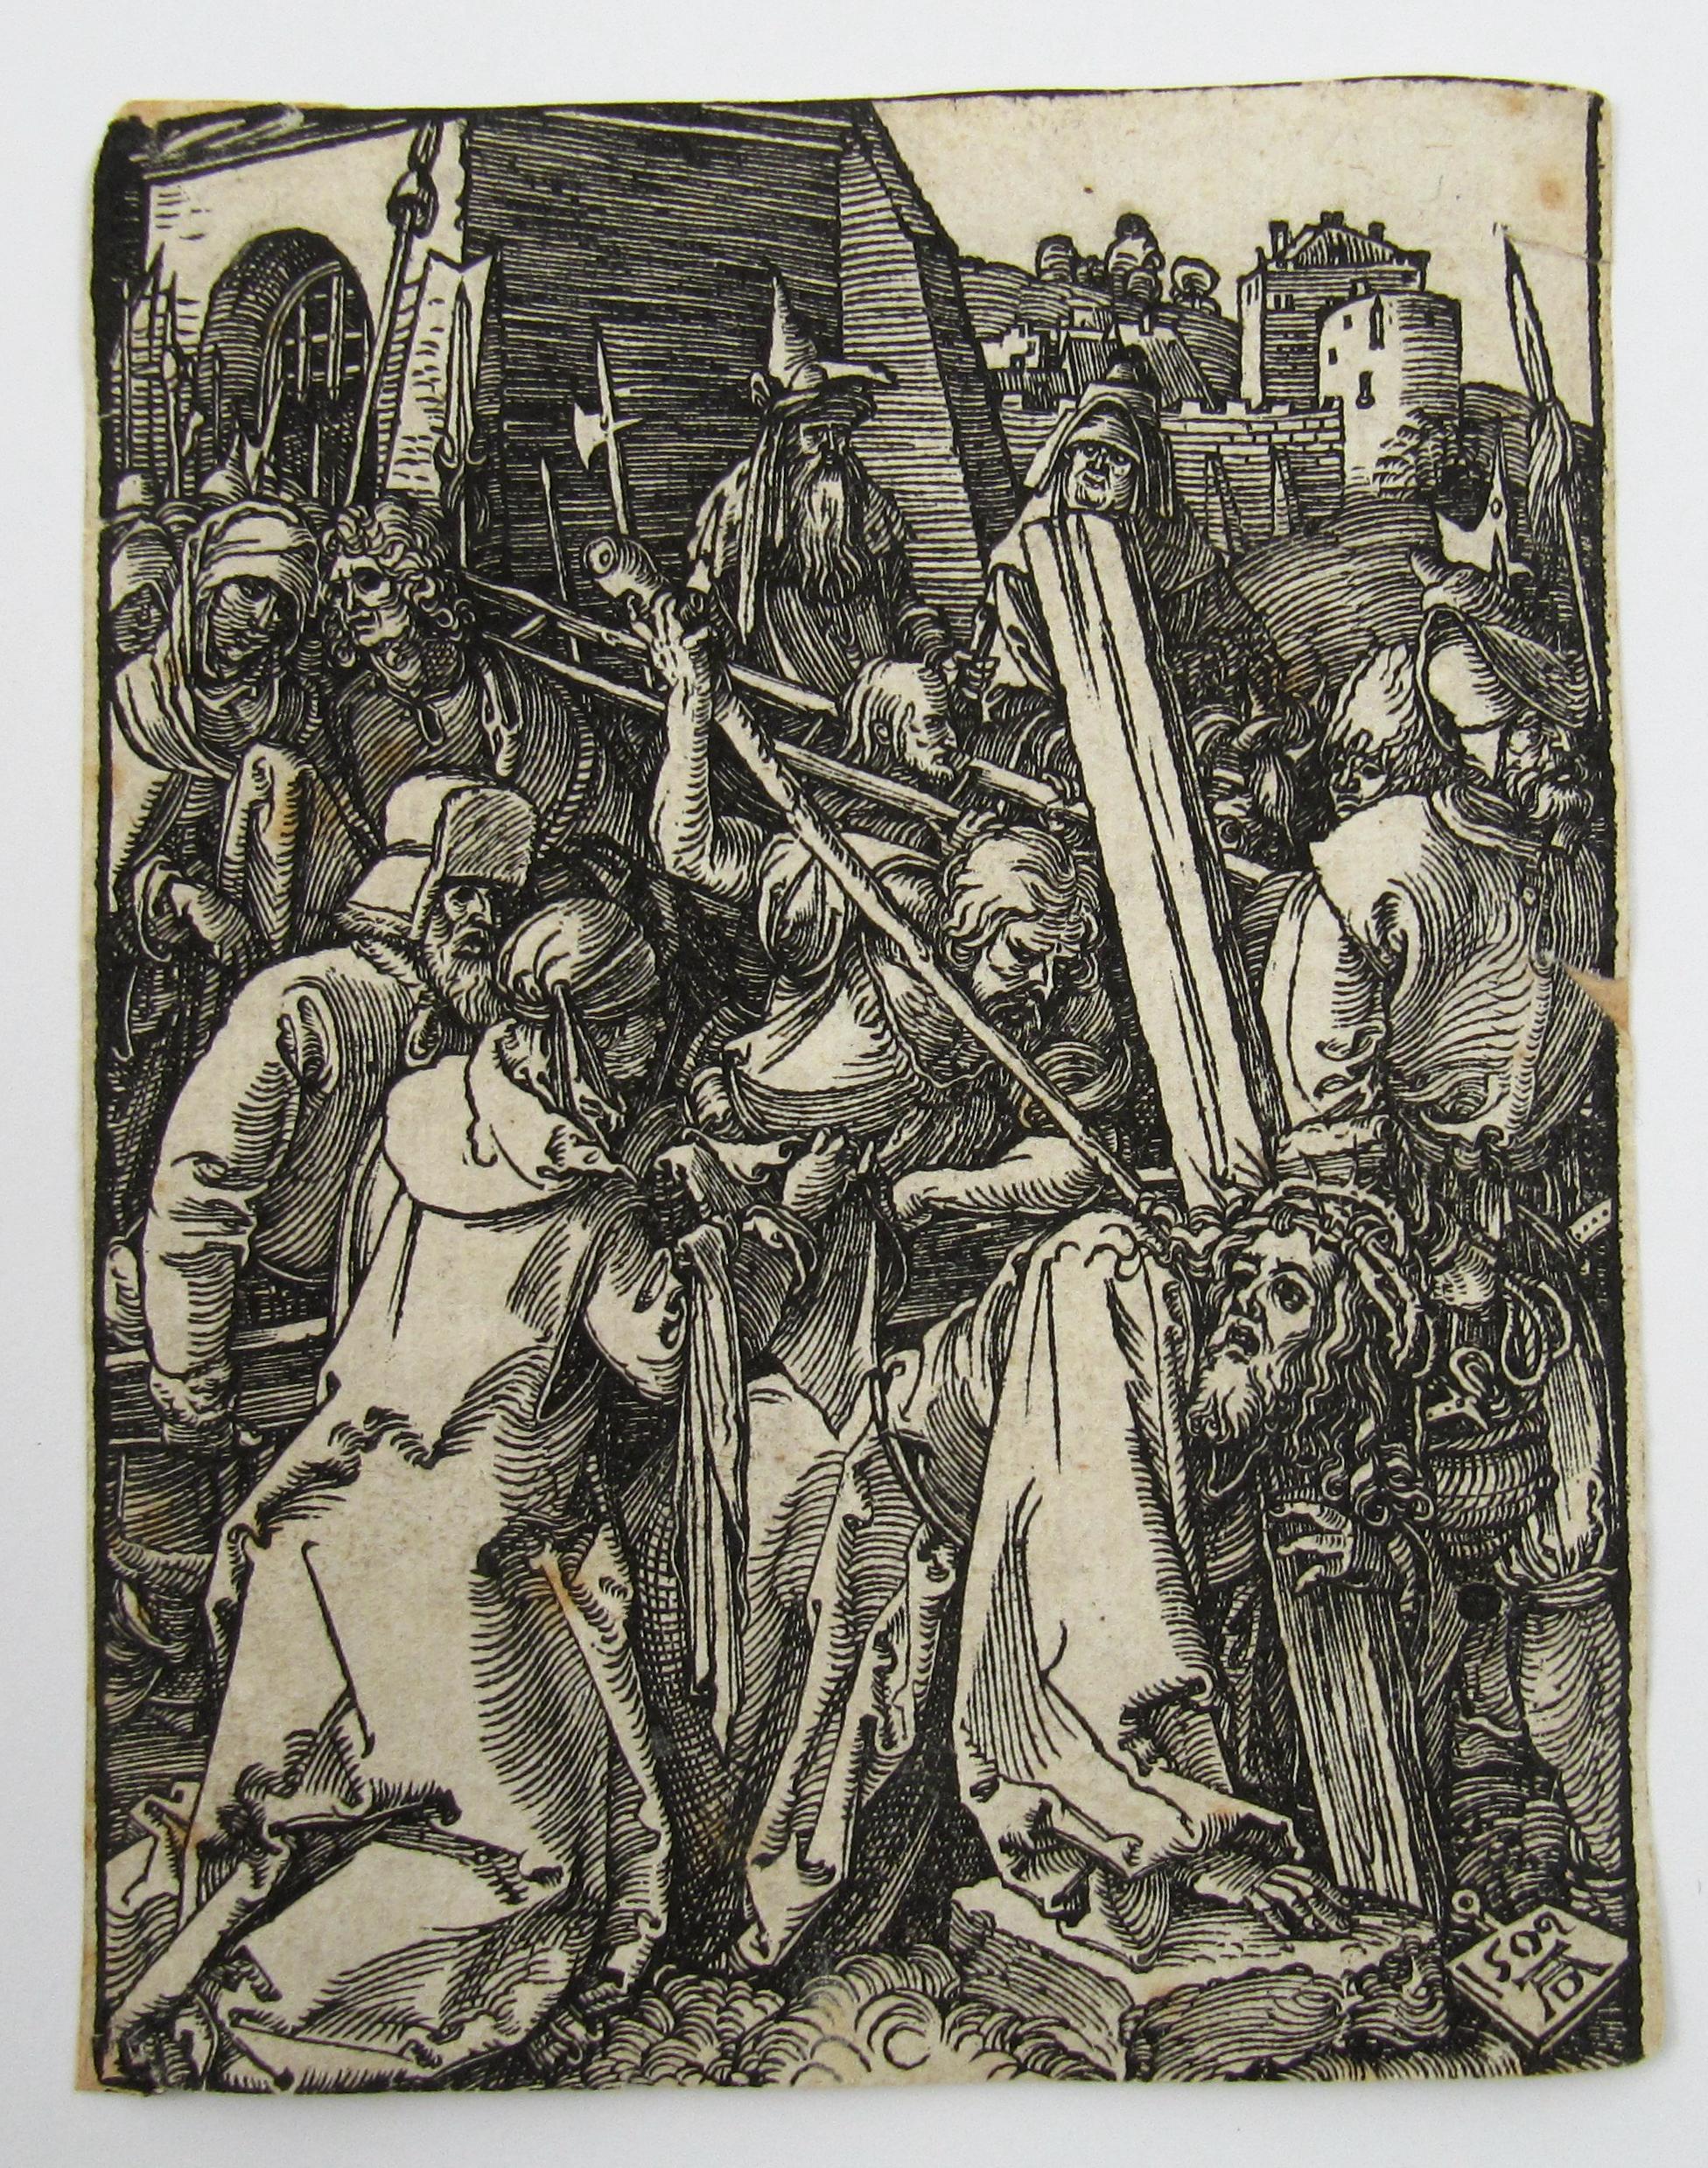 Christ Carrying the Cross - Small Passion - Woodcut - 16thC Proof Impression - Print by Albrecht Dürer